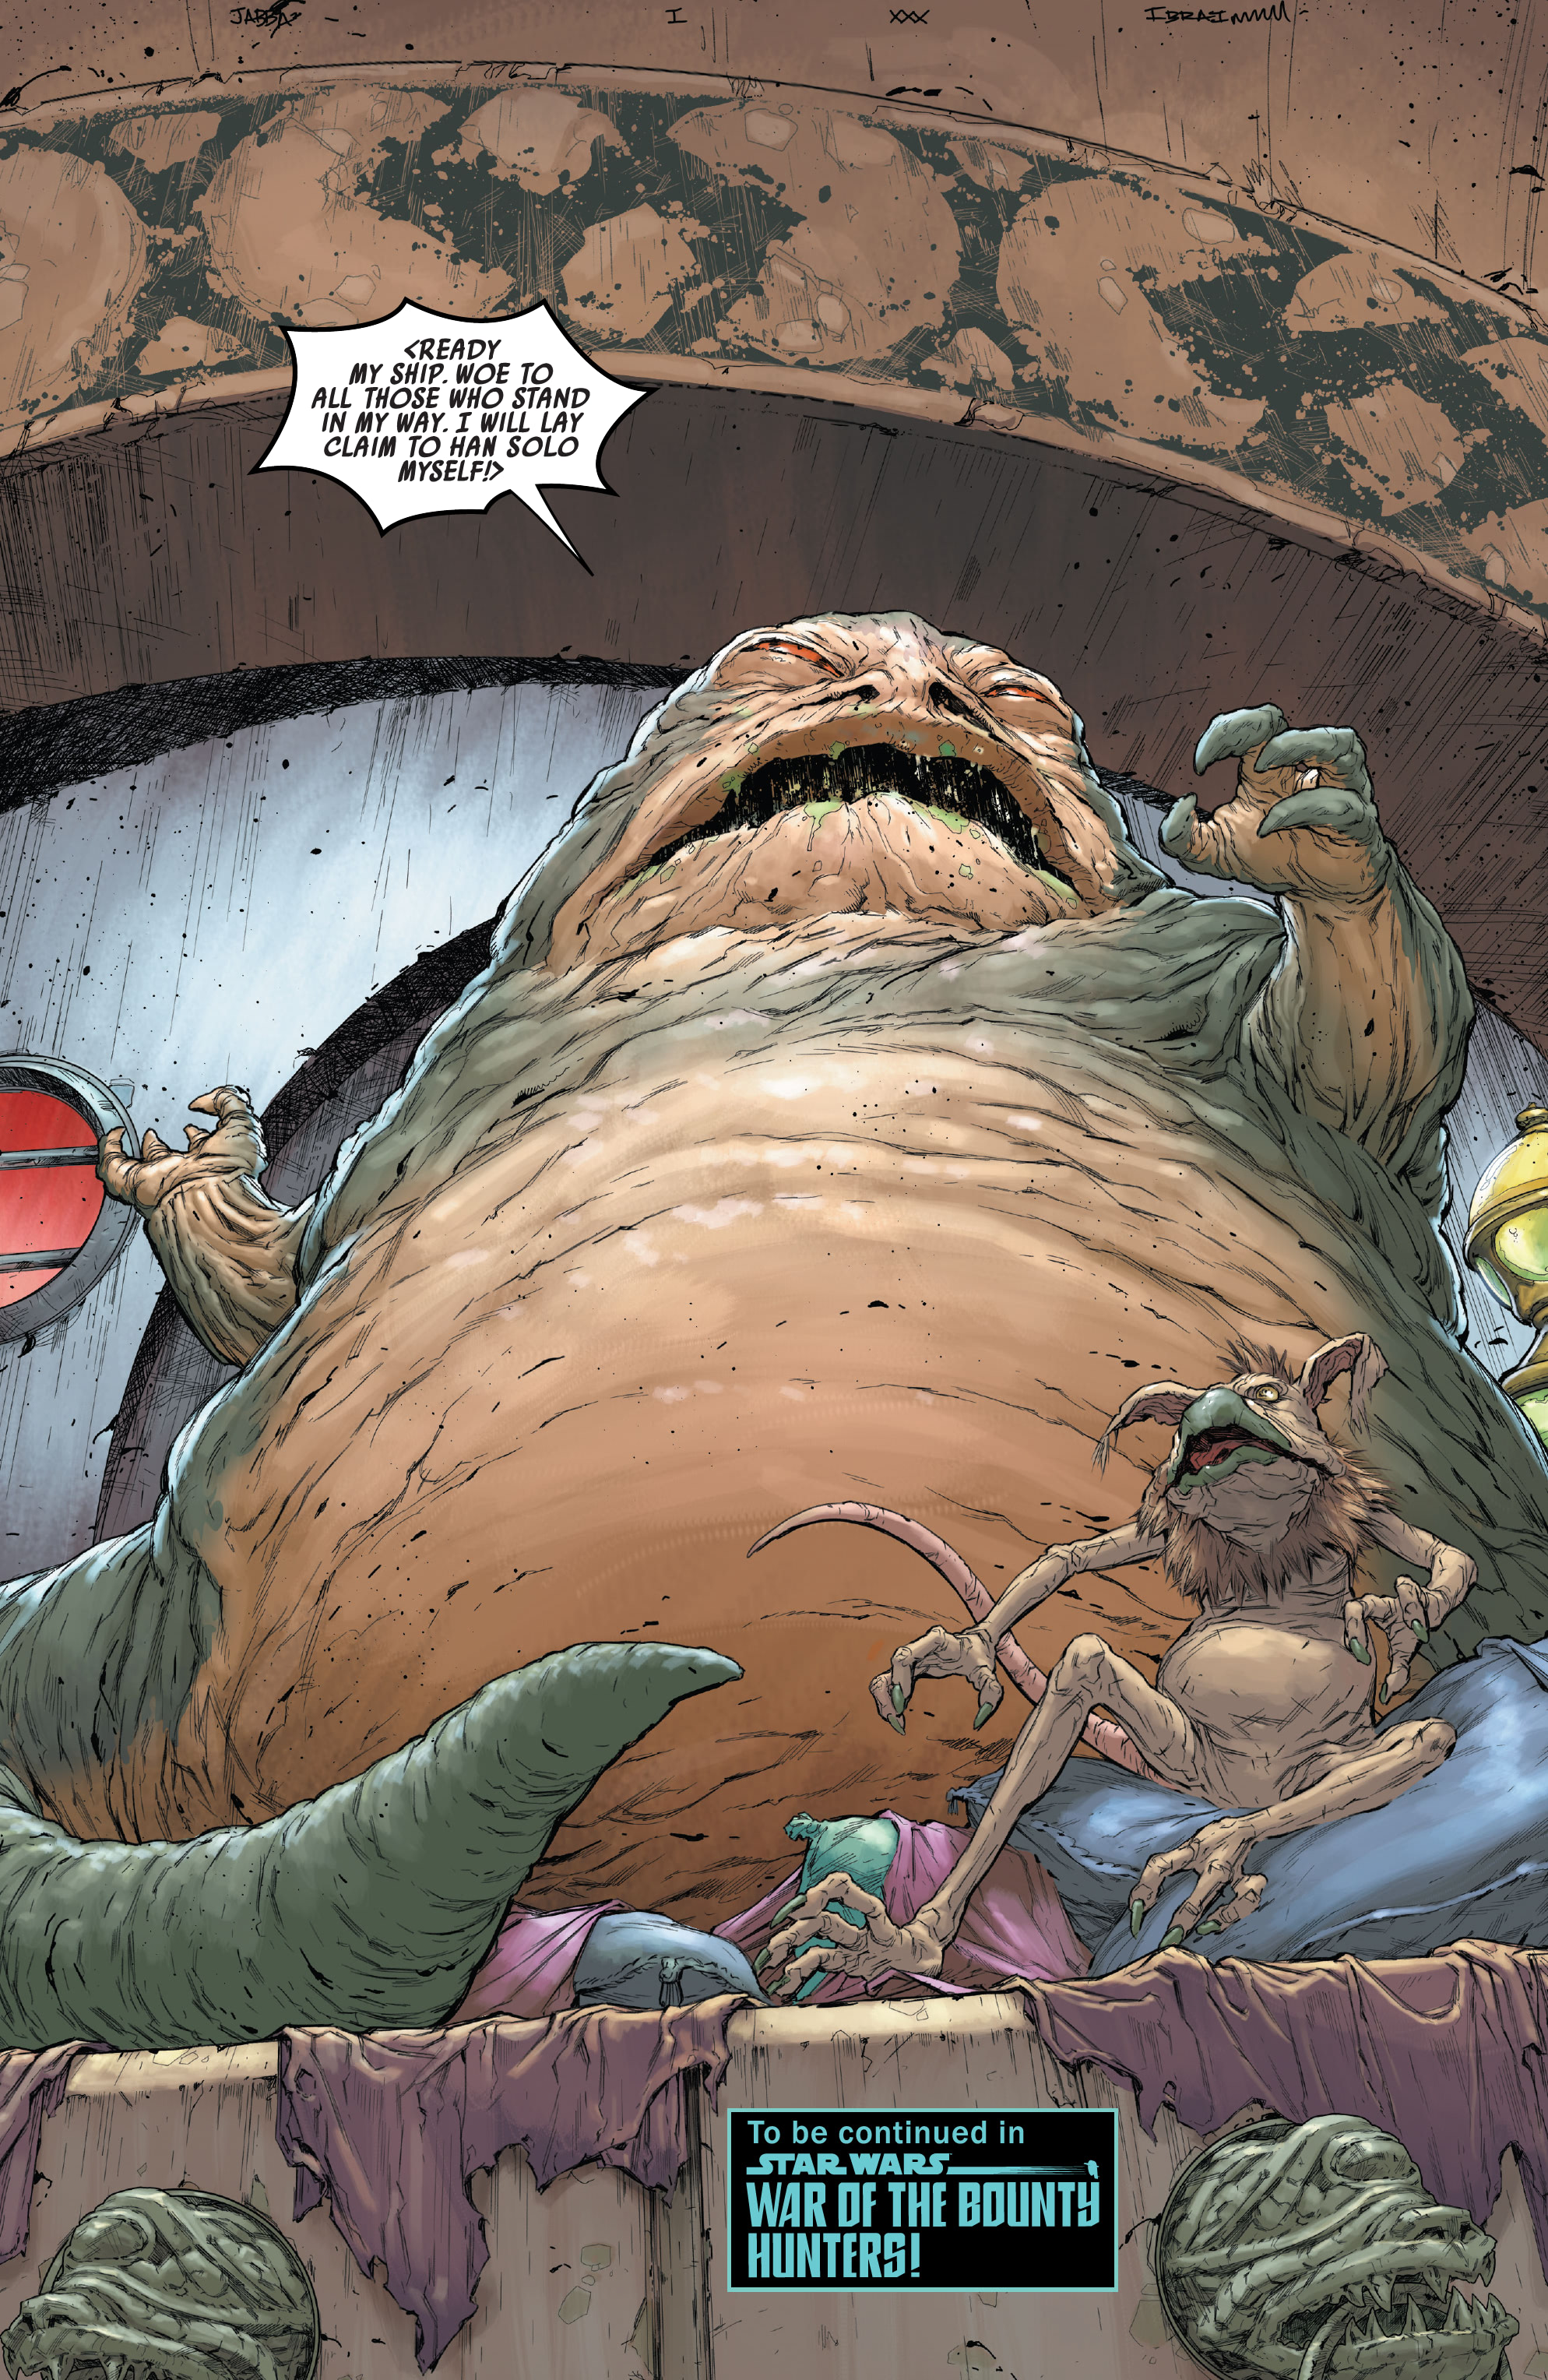 Star Wars War Of The Bounty Hunters Jabba The Hutt 2021 Chapter 1 Page 3 4708